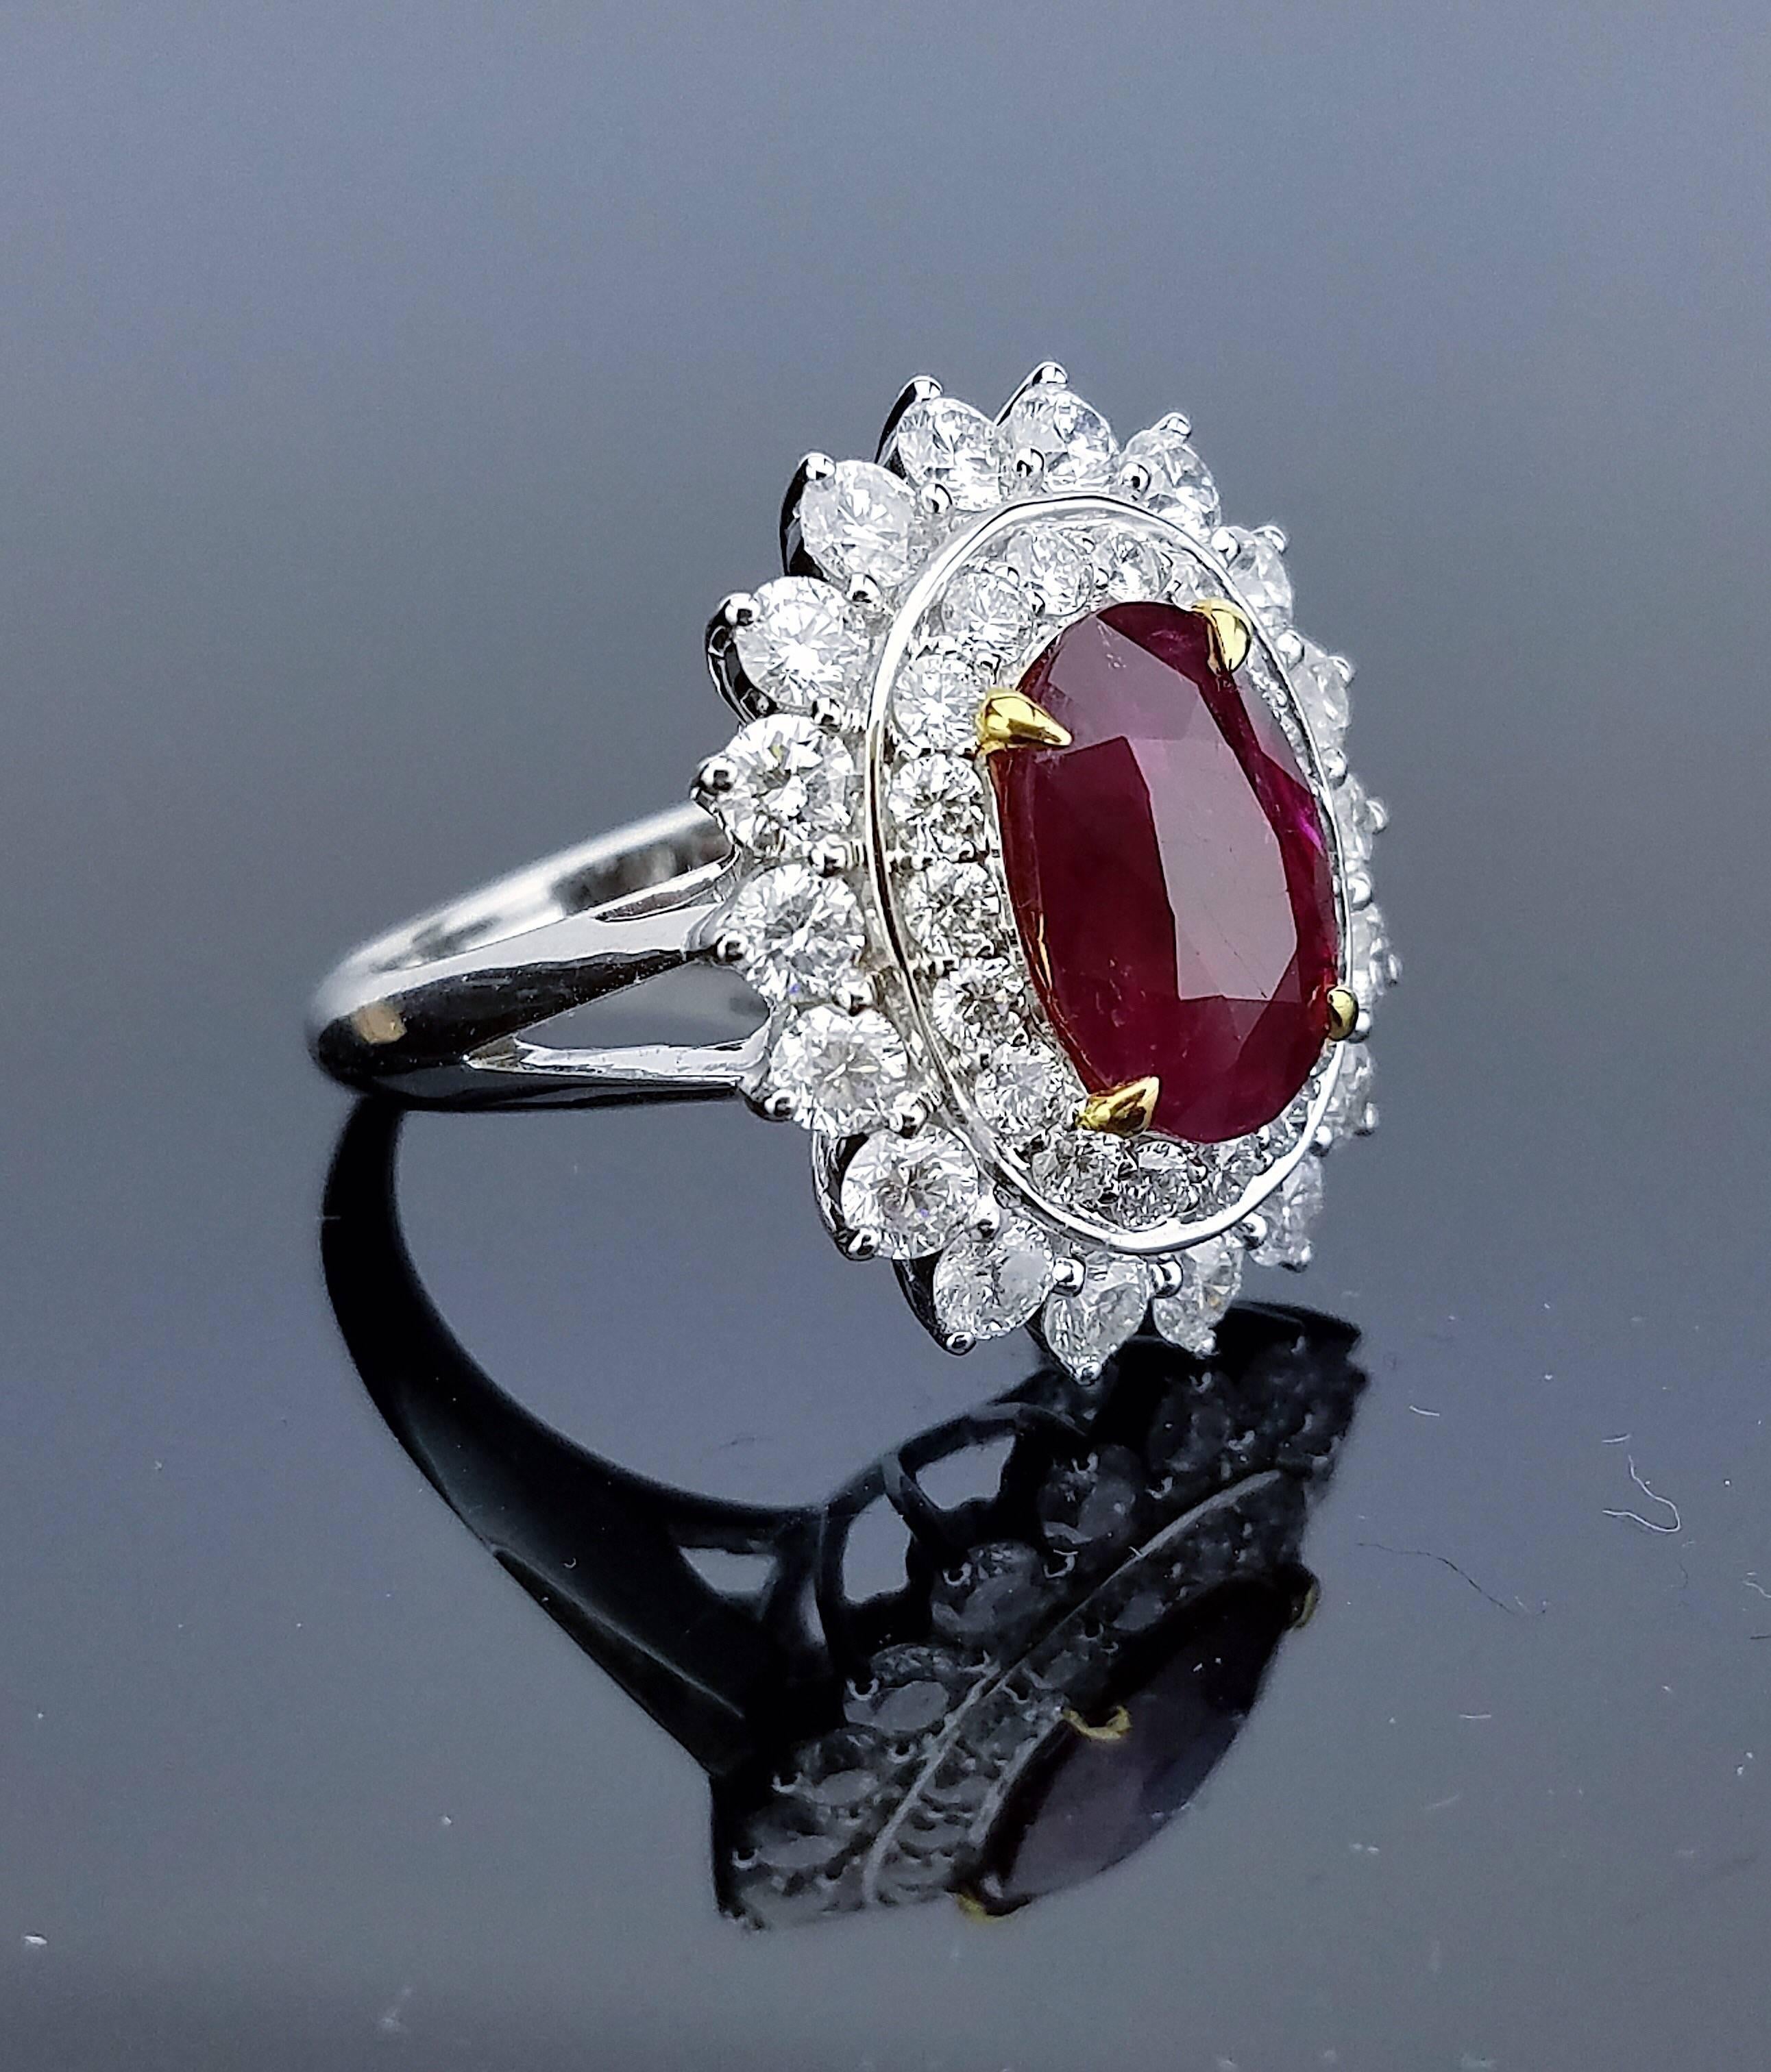 No heat Burma Ruby Ring with Yellow Gold Prongs, surrounded with Brilliant cut Diamonds all mounted on 18K White Gold hoop  

Center Stone Details:  
Stone: Burma Ruby (no heat) 
Cut: Oval 
Weight: 3.41 carat  

Diamond Details:  
Cut: Round
Total